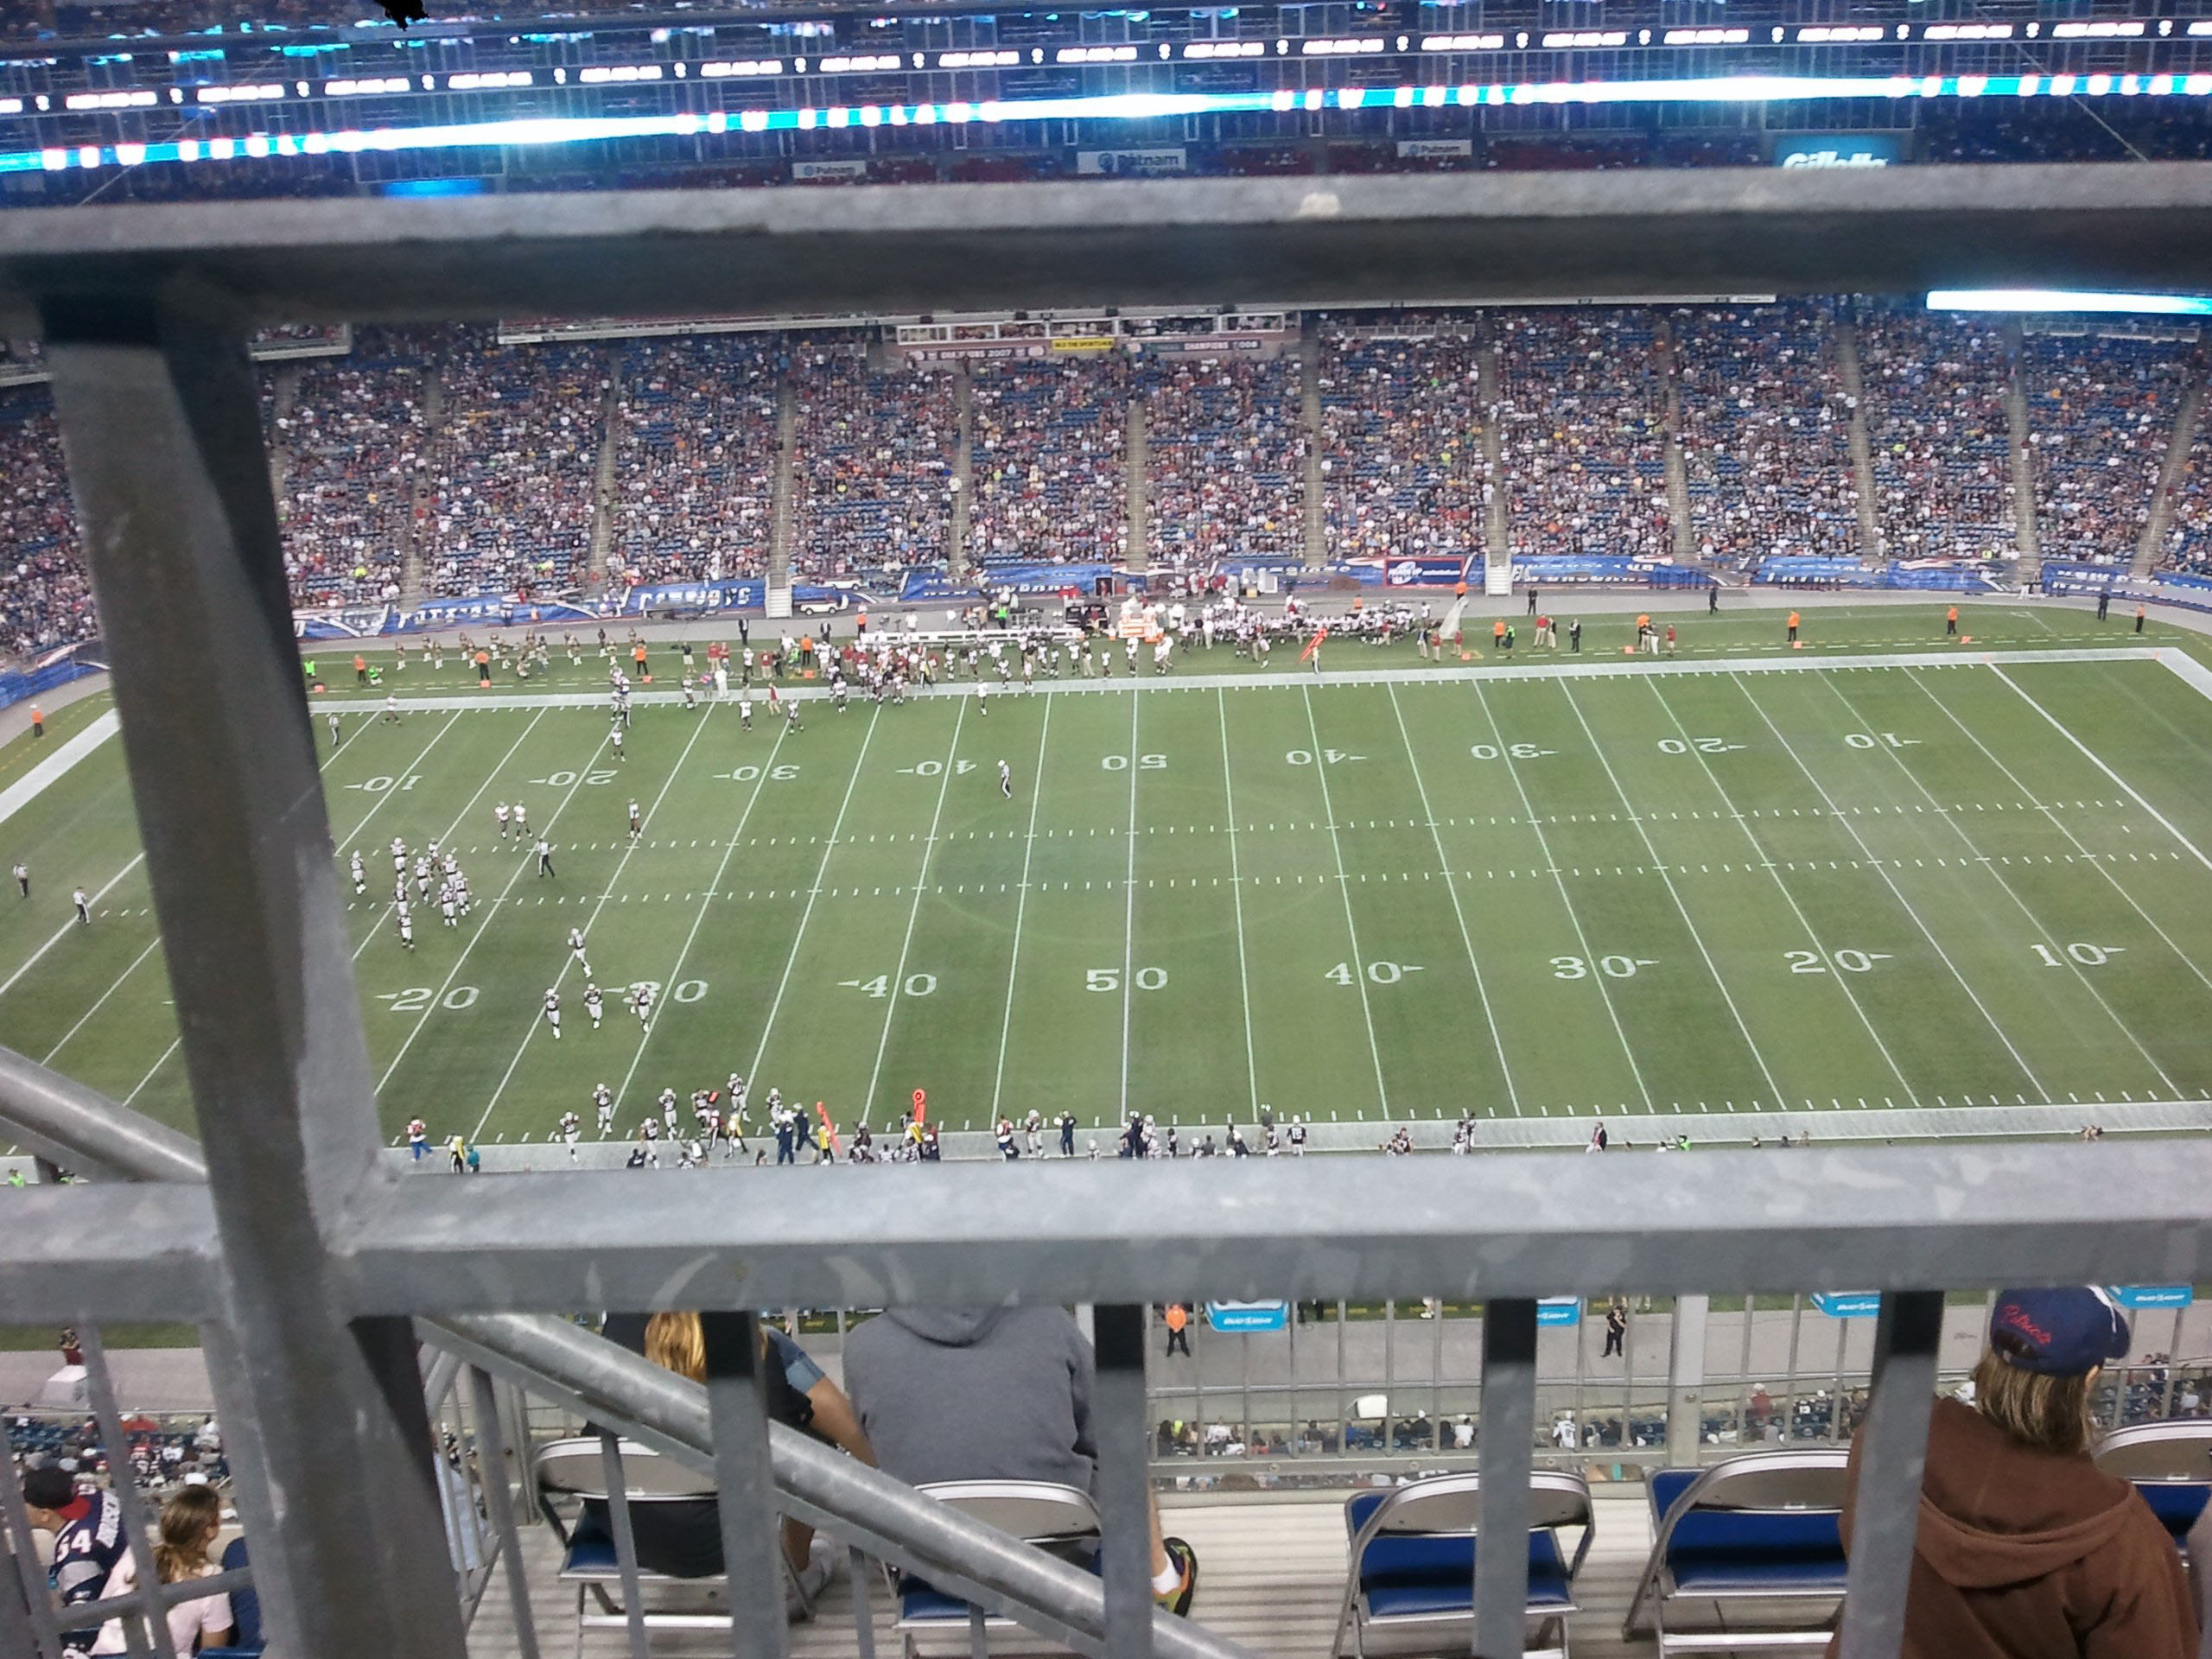 section 310, row 8 seat view  for football - gillette stadium